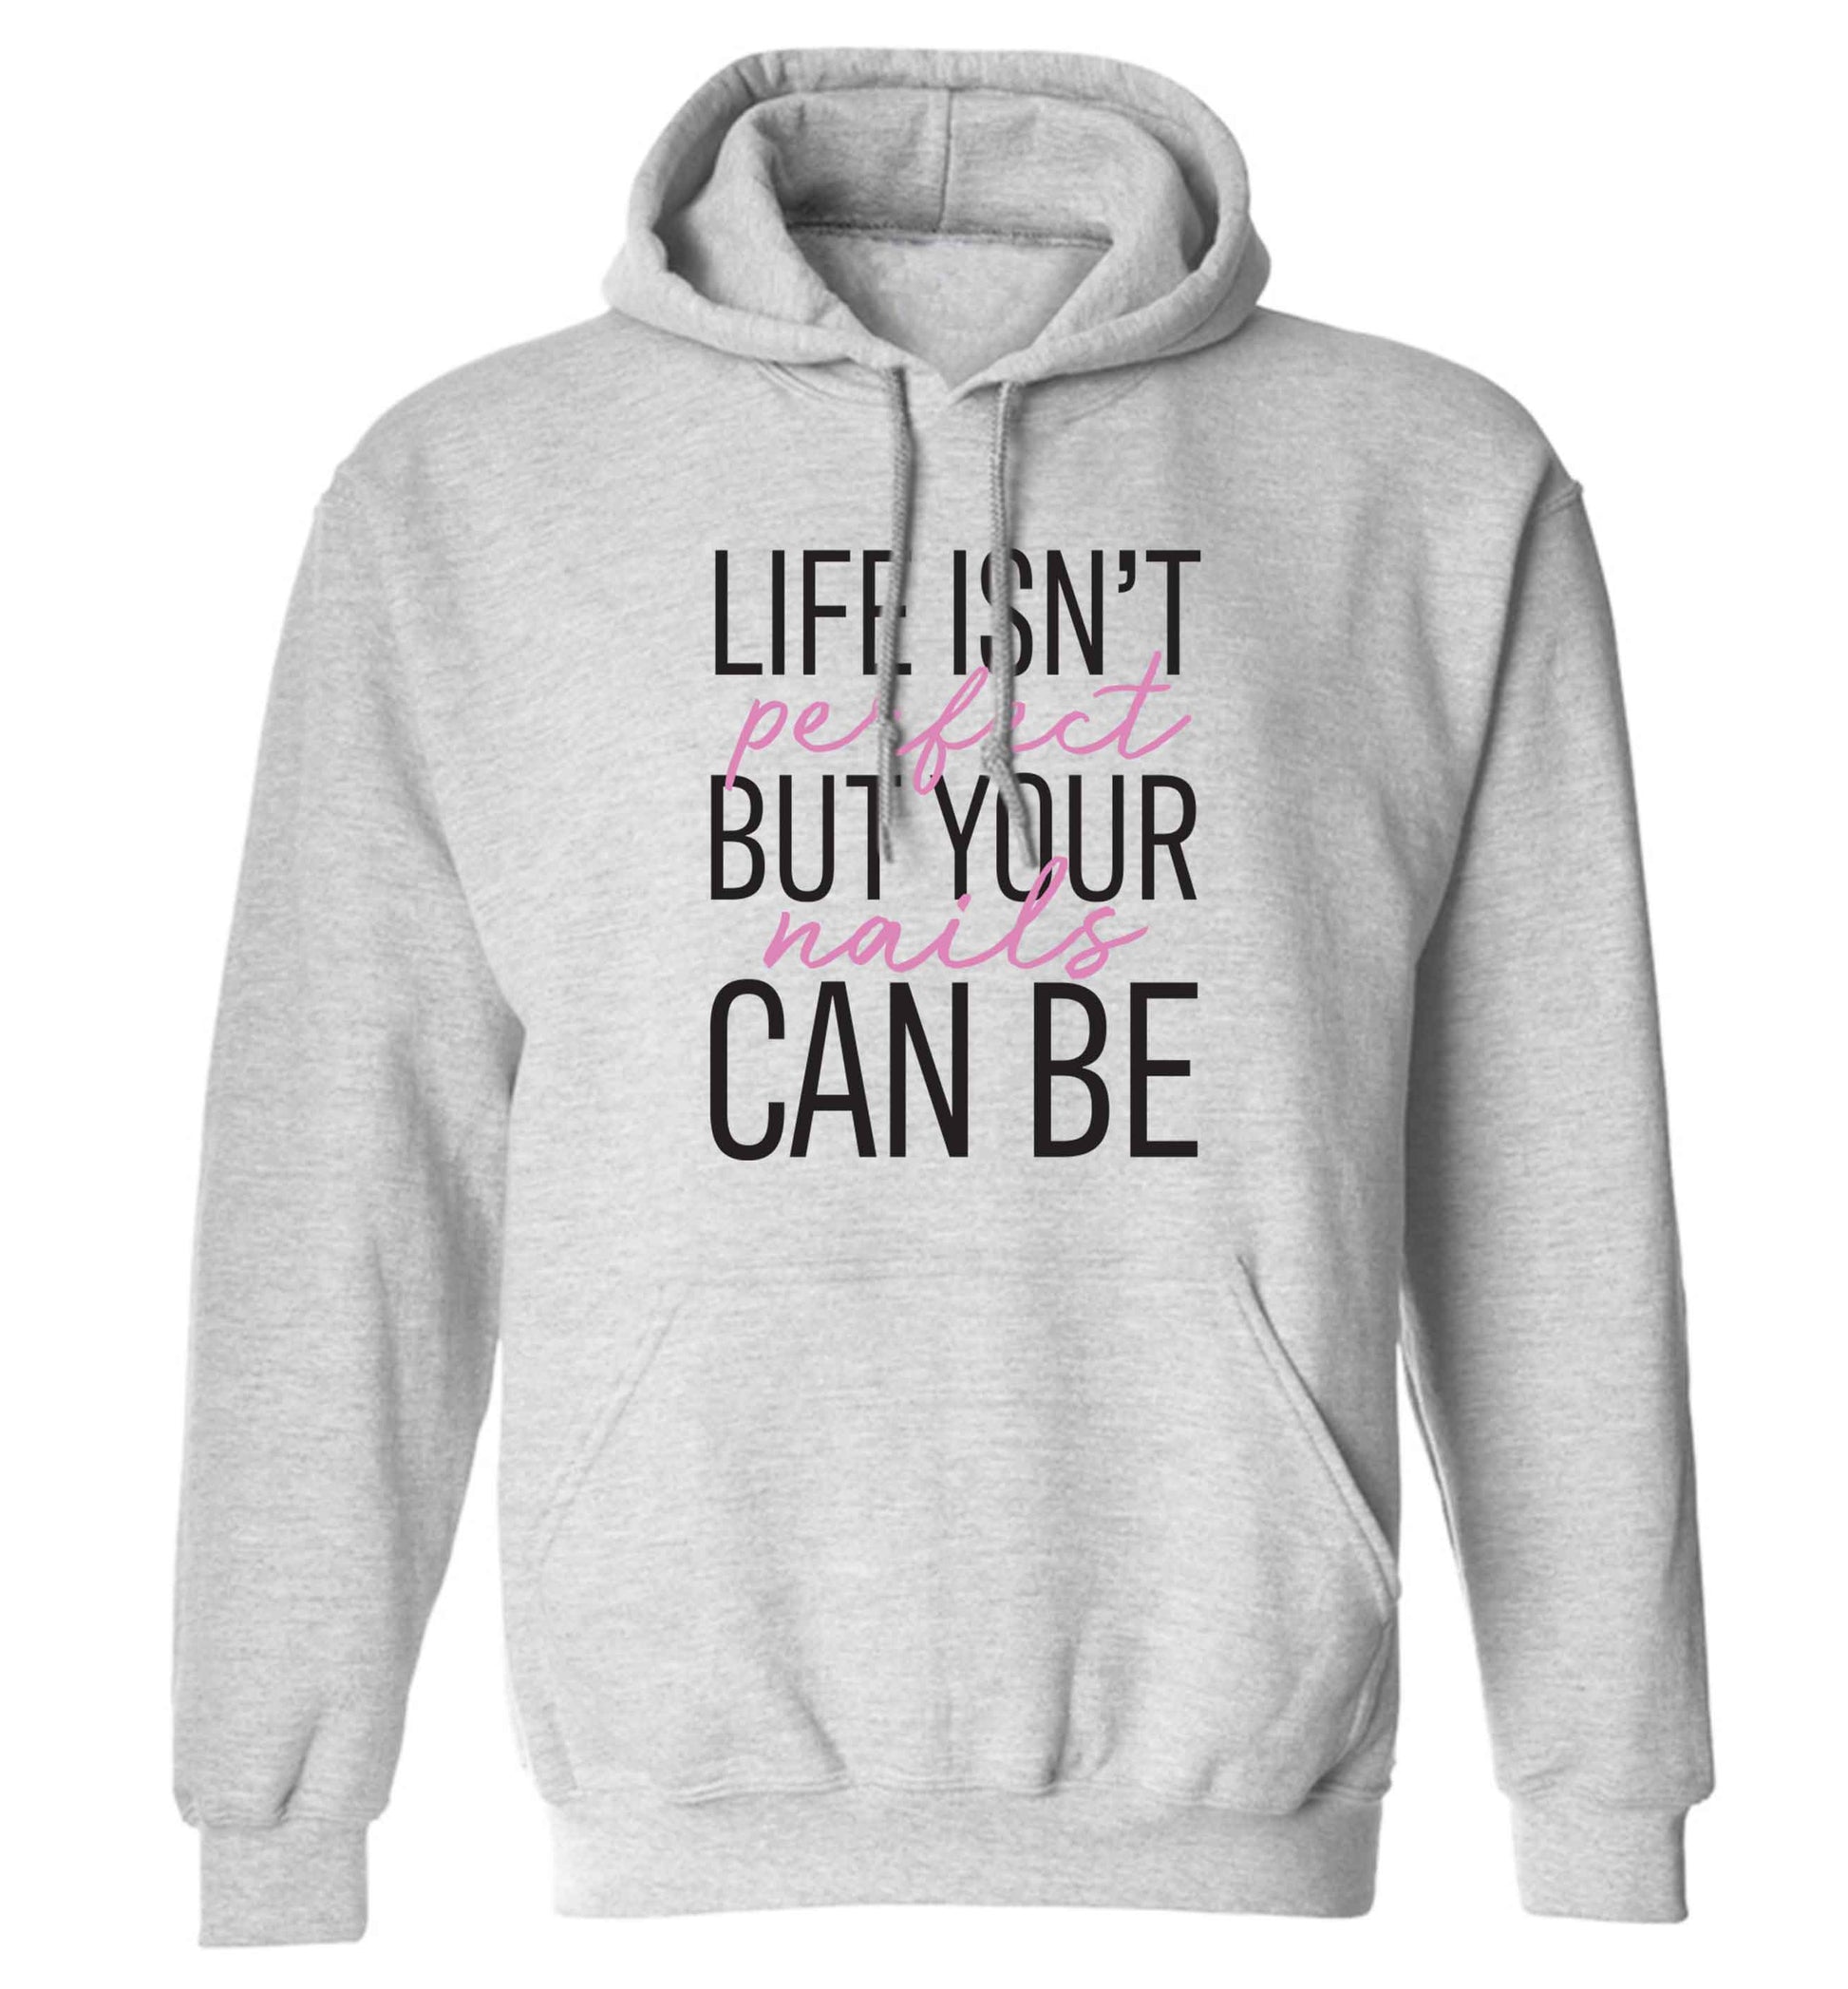 Life isn't perfect but your nails can be adults unisex grey hoodie 2XL